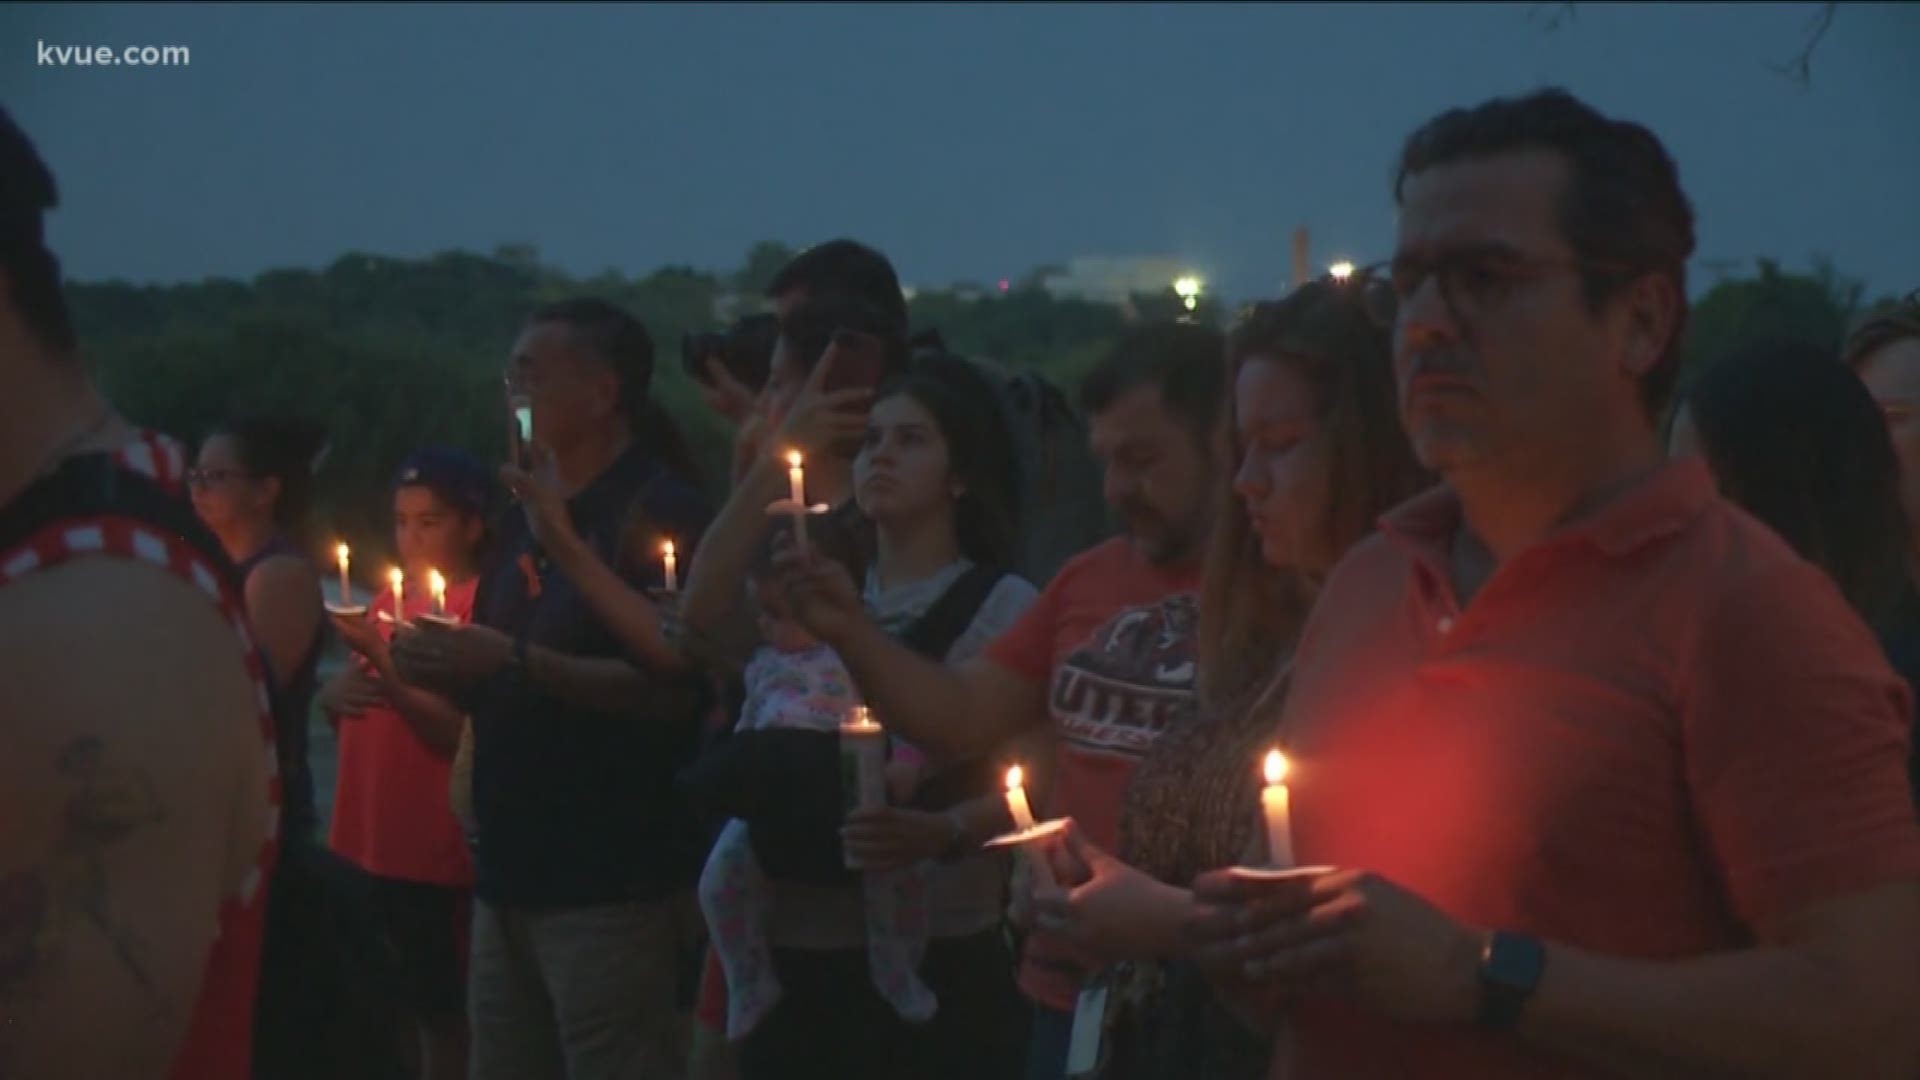 Across the country people are mourning the victims of a deadly mass shooting that happened in El Paso on Saturday.